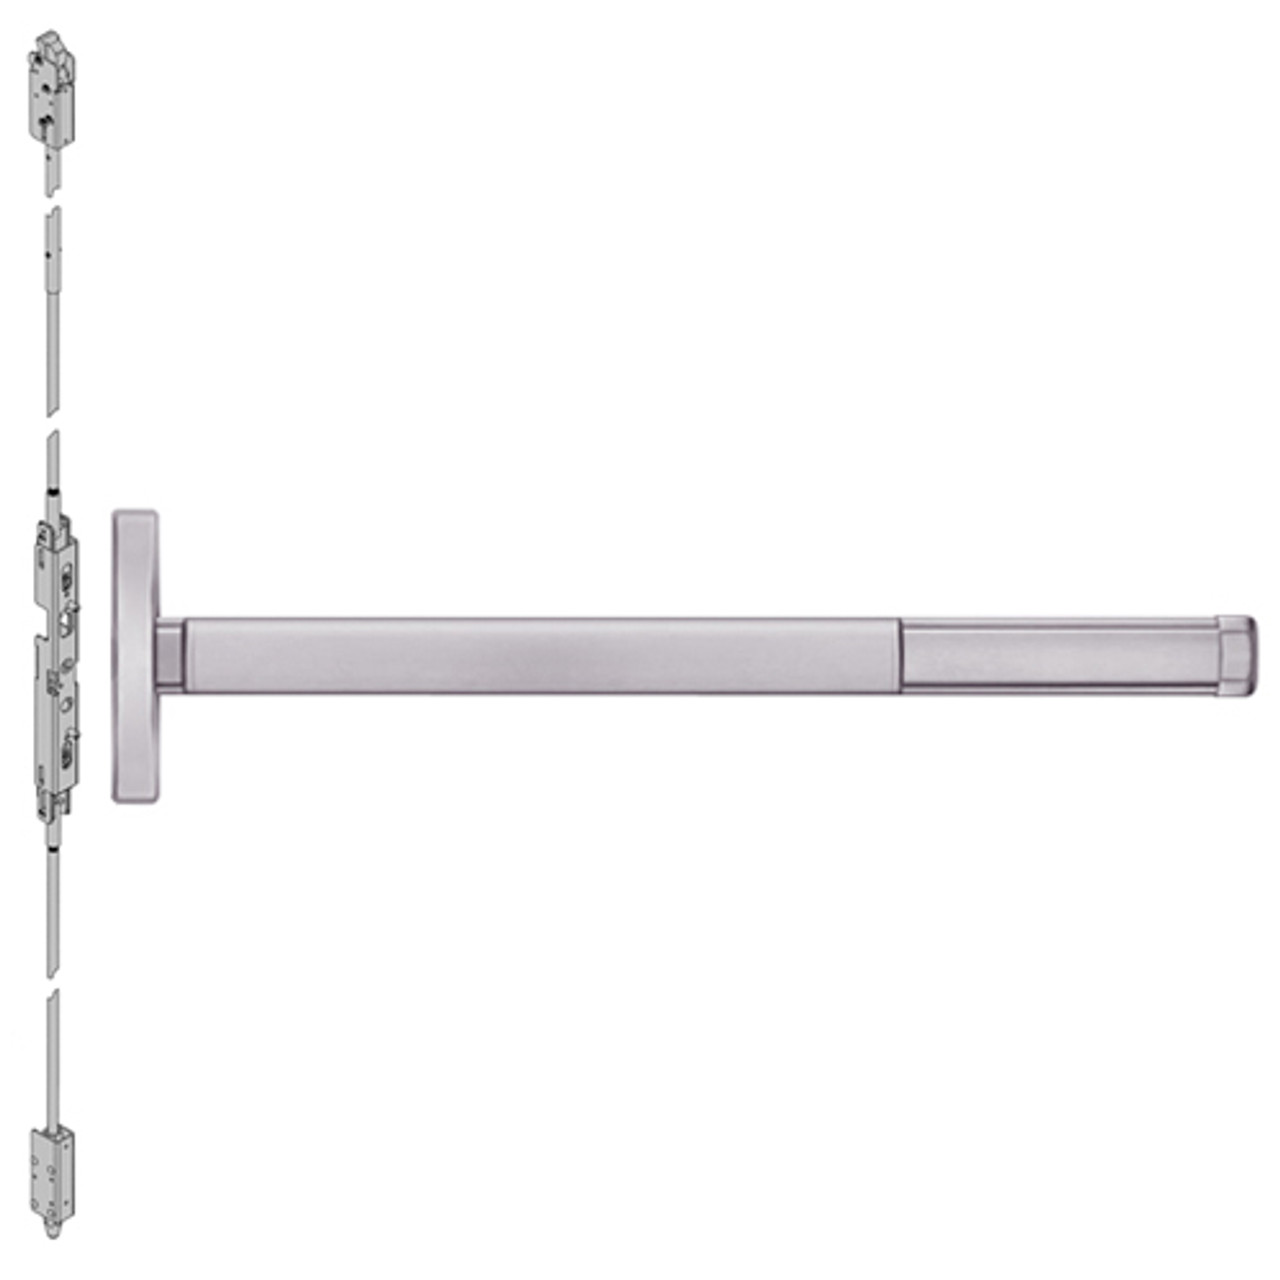 ELR2601-630-36 PHI 2600 Series Concealed Vertical Rod Exit Device with Electric Latch Retraction Prepped for Cover Plate in Satin Stainless Steel Finish